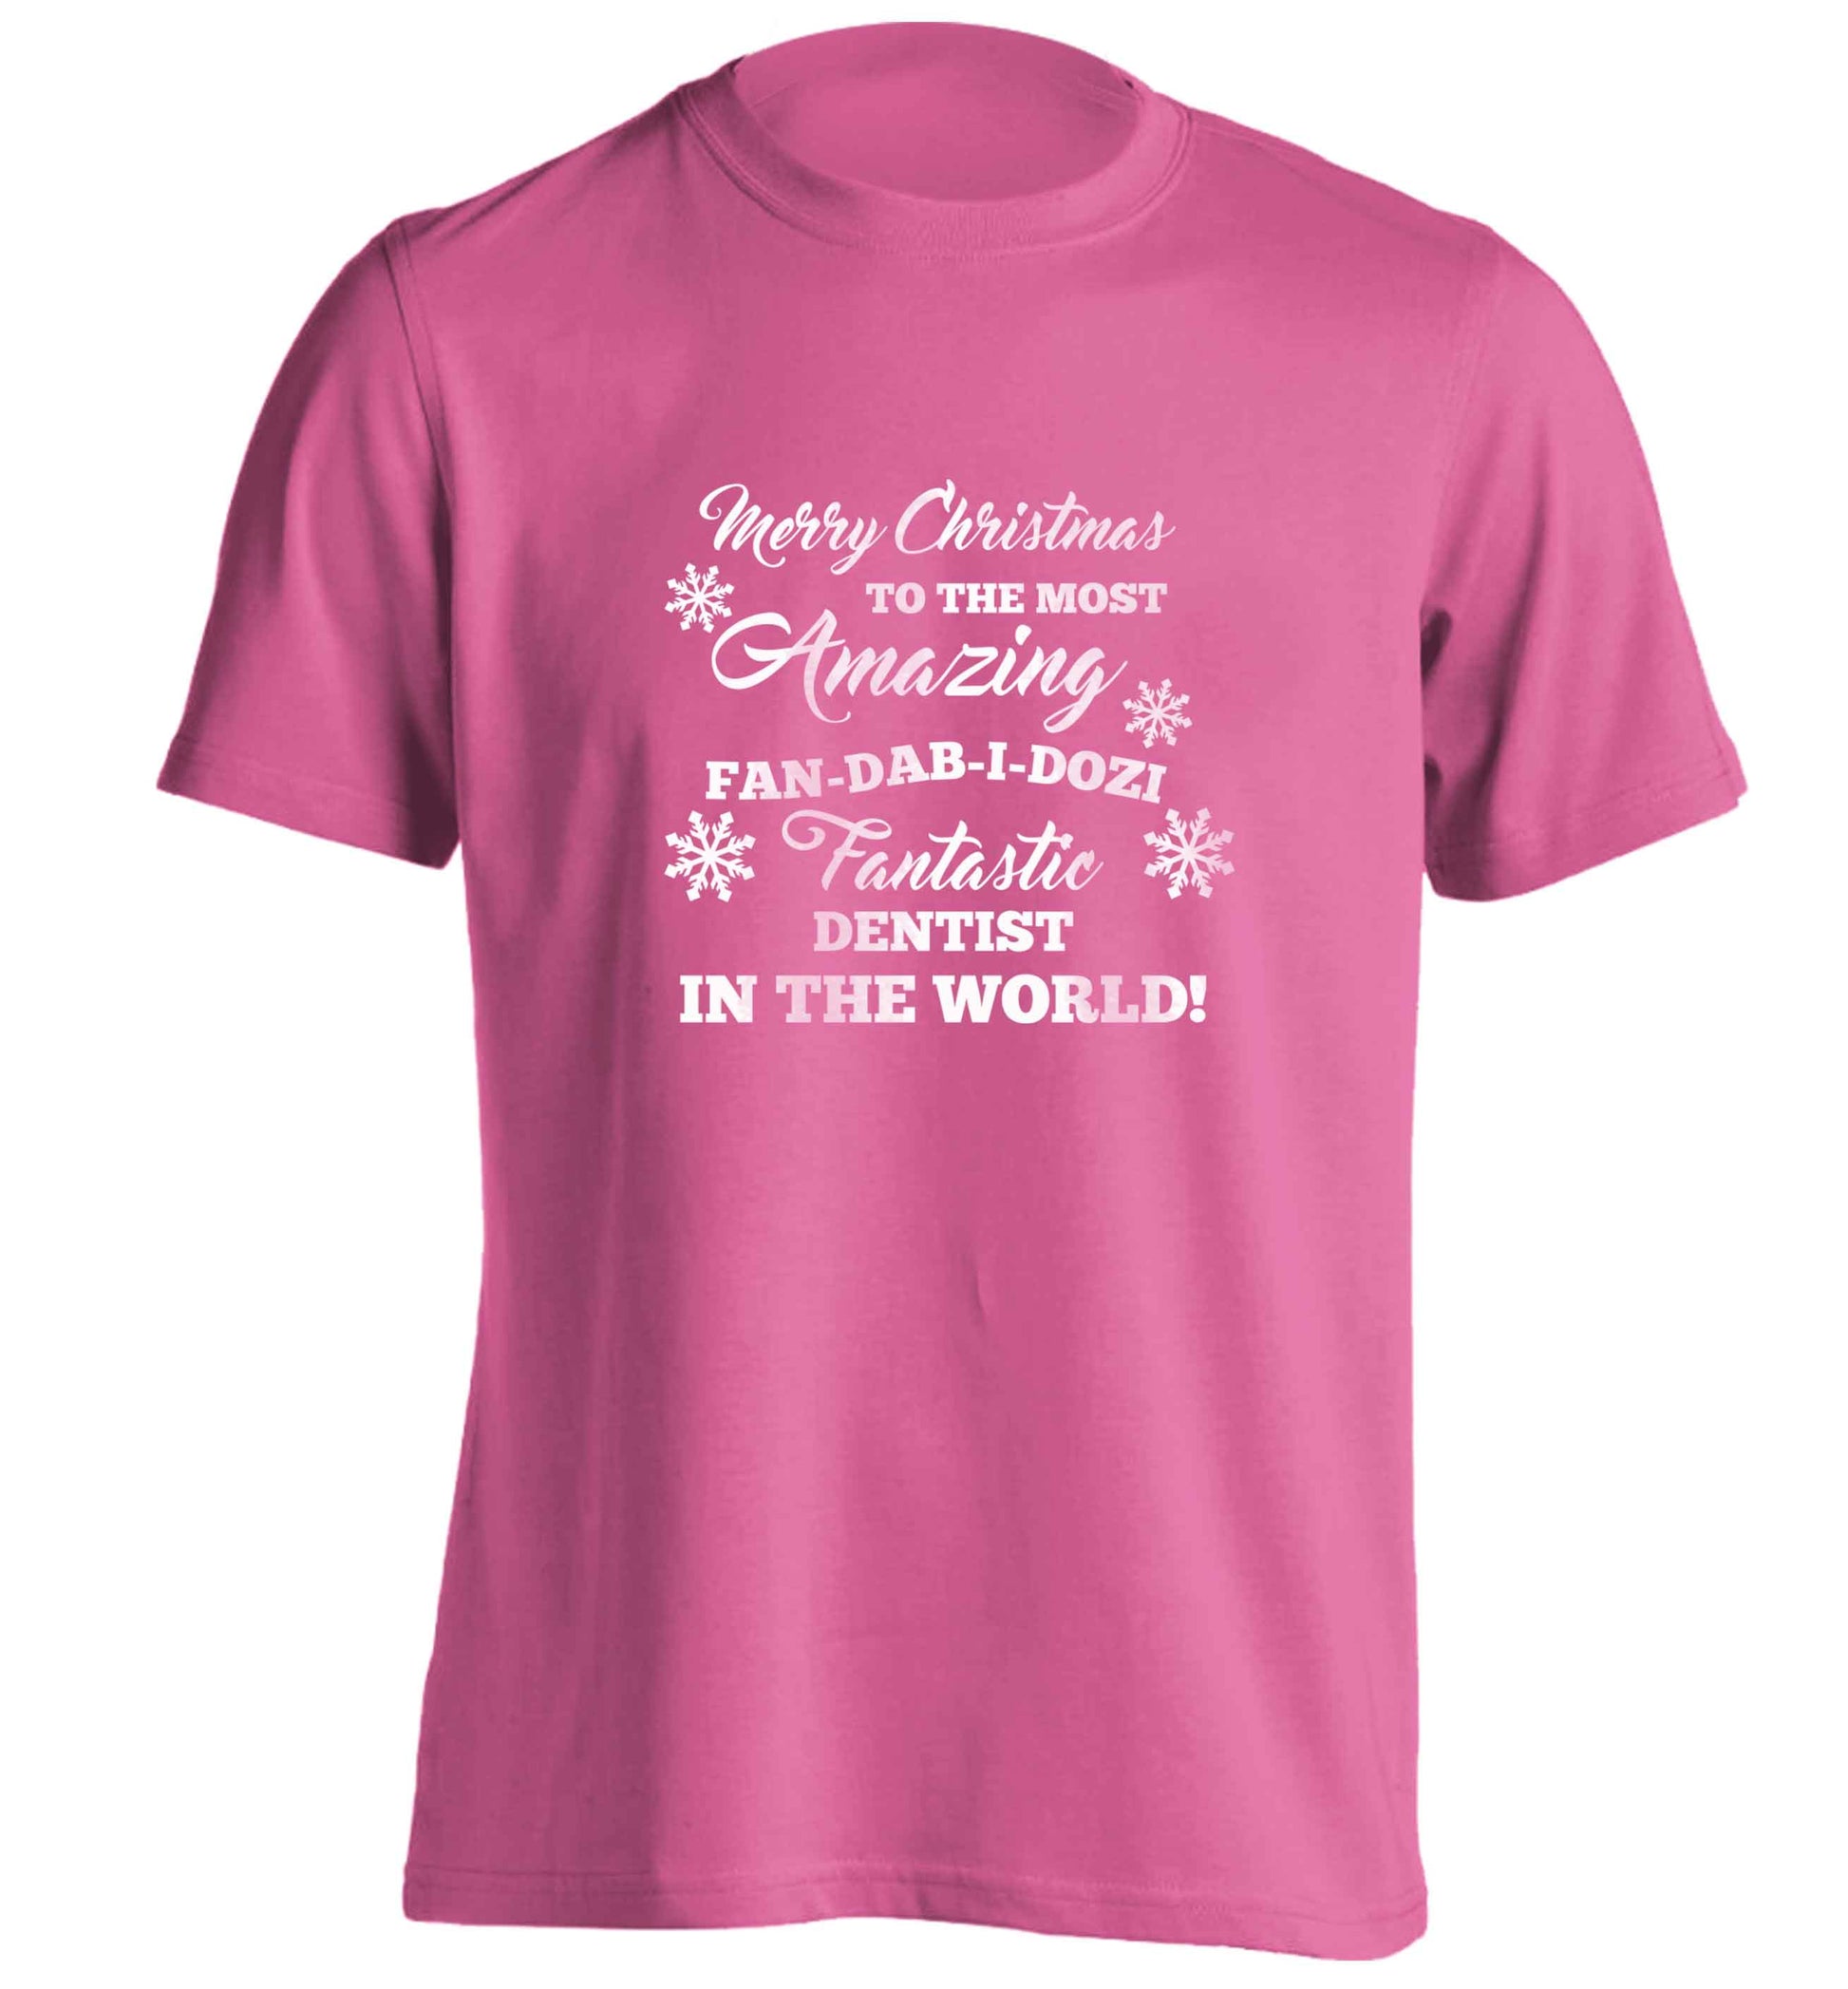 Merry Christmas to the most amazing dentist in the world! adults unisex pink Tshirt 2XL